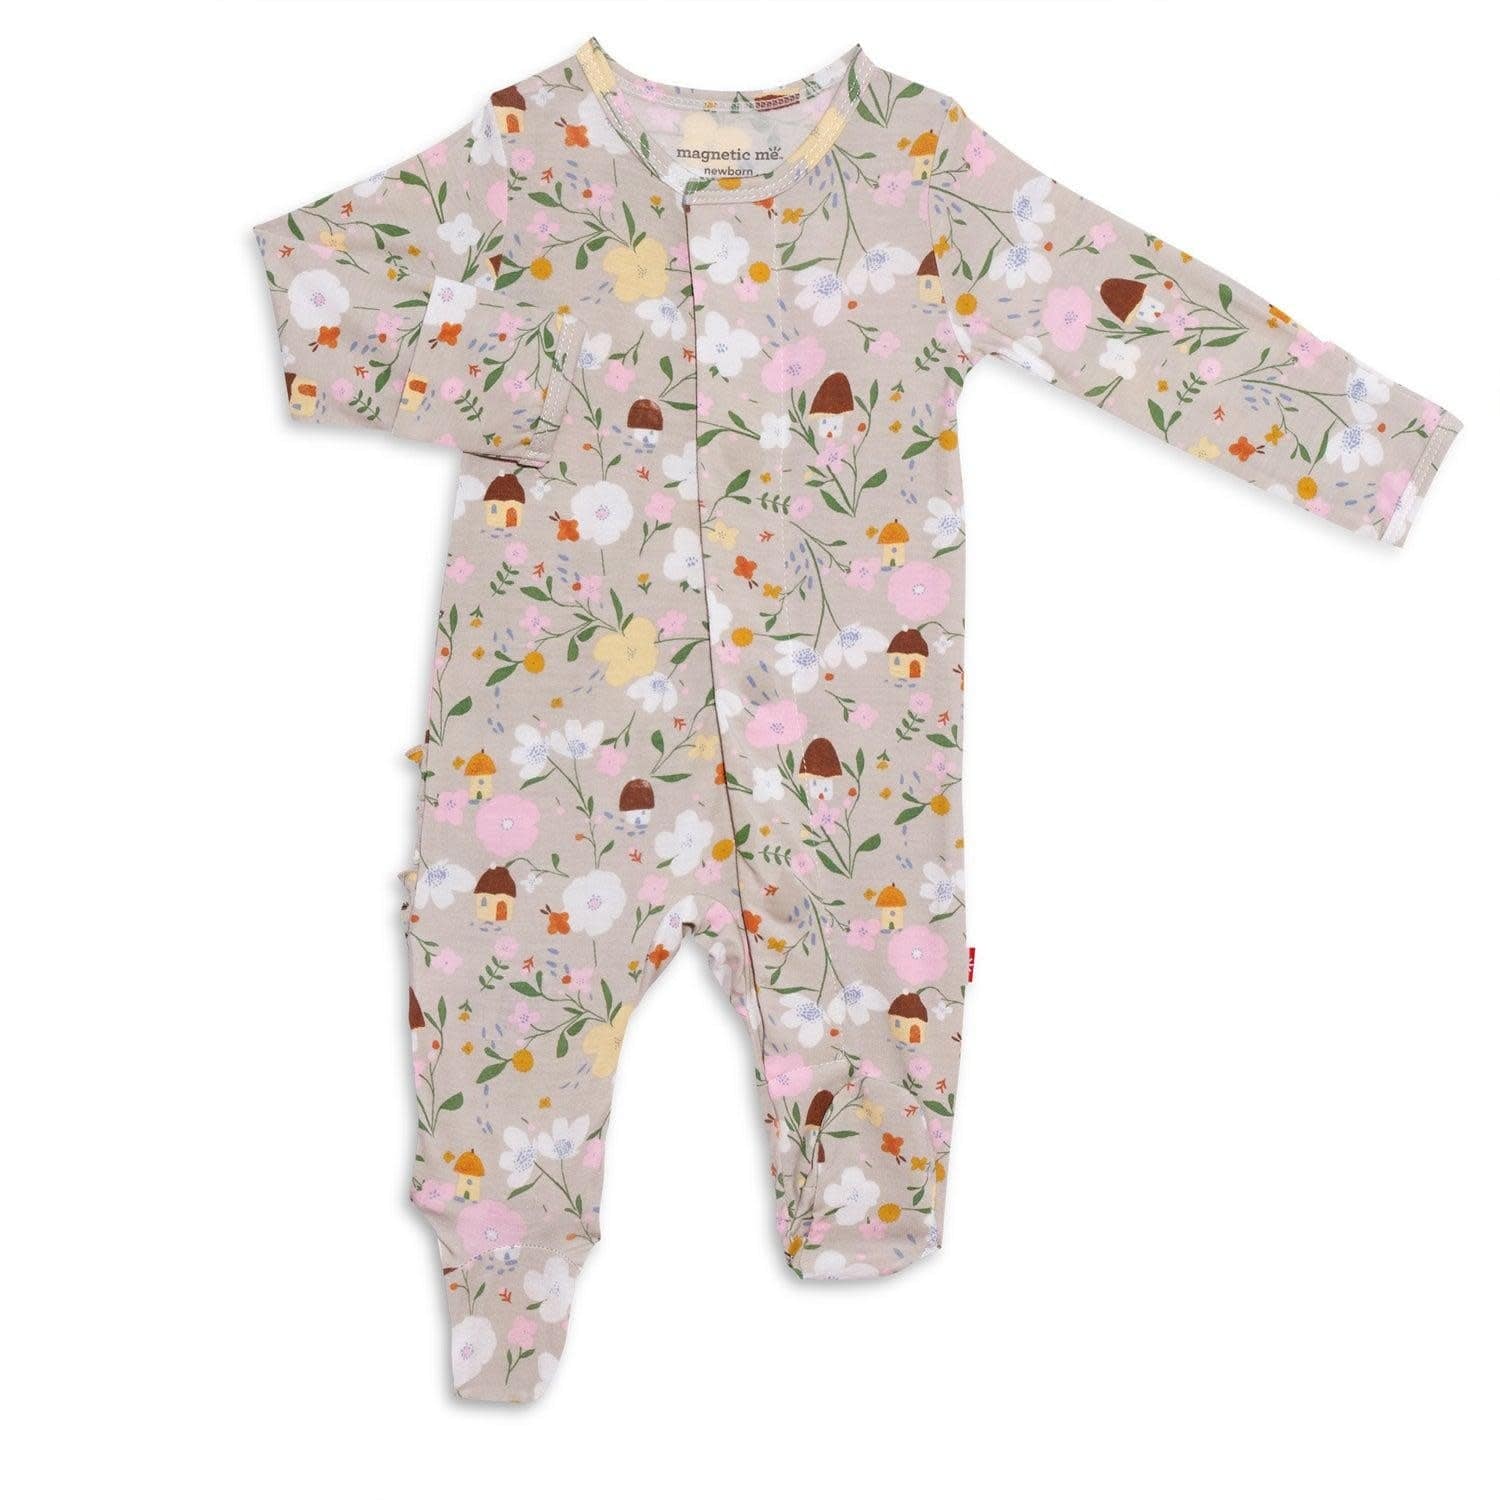 Magnetic Me Infant Clothing Magnetic Me Footie Portabella Posies